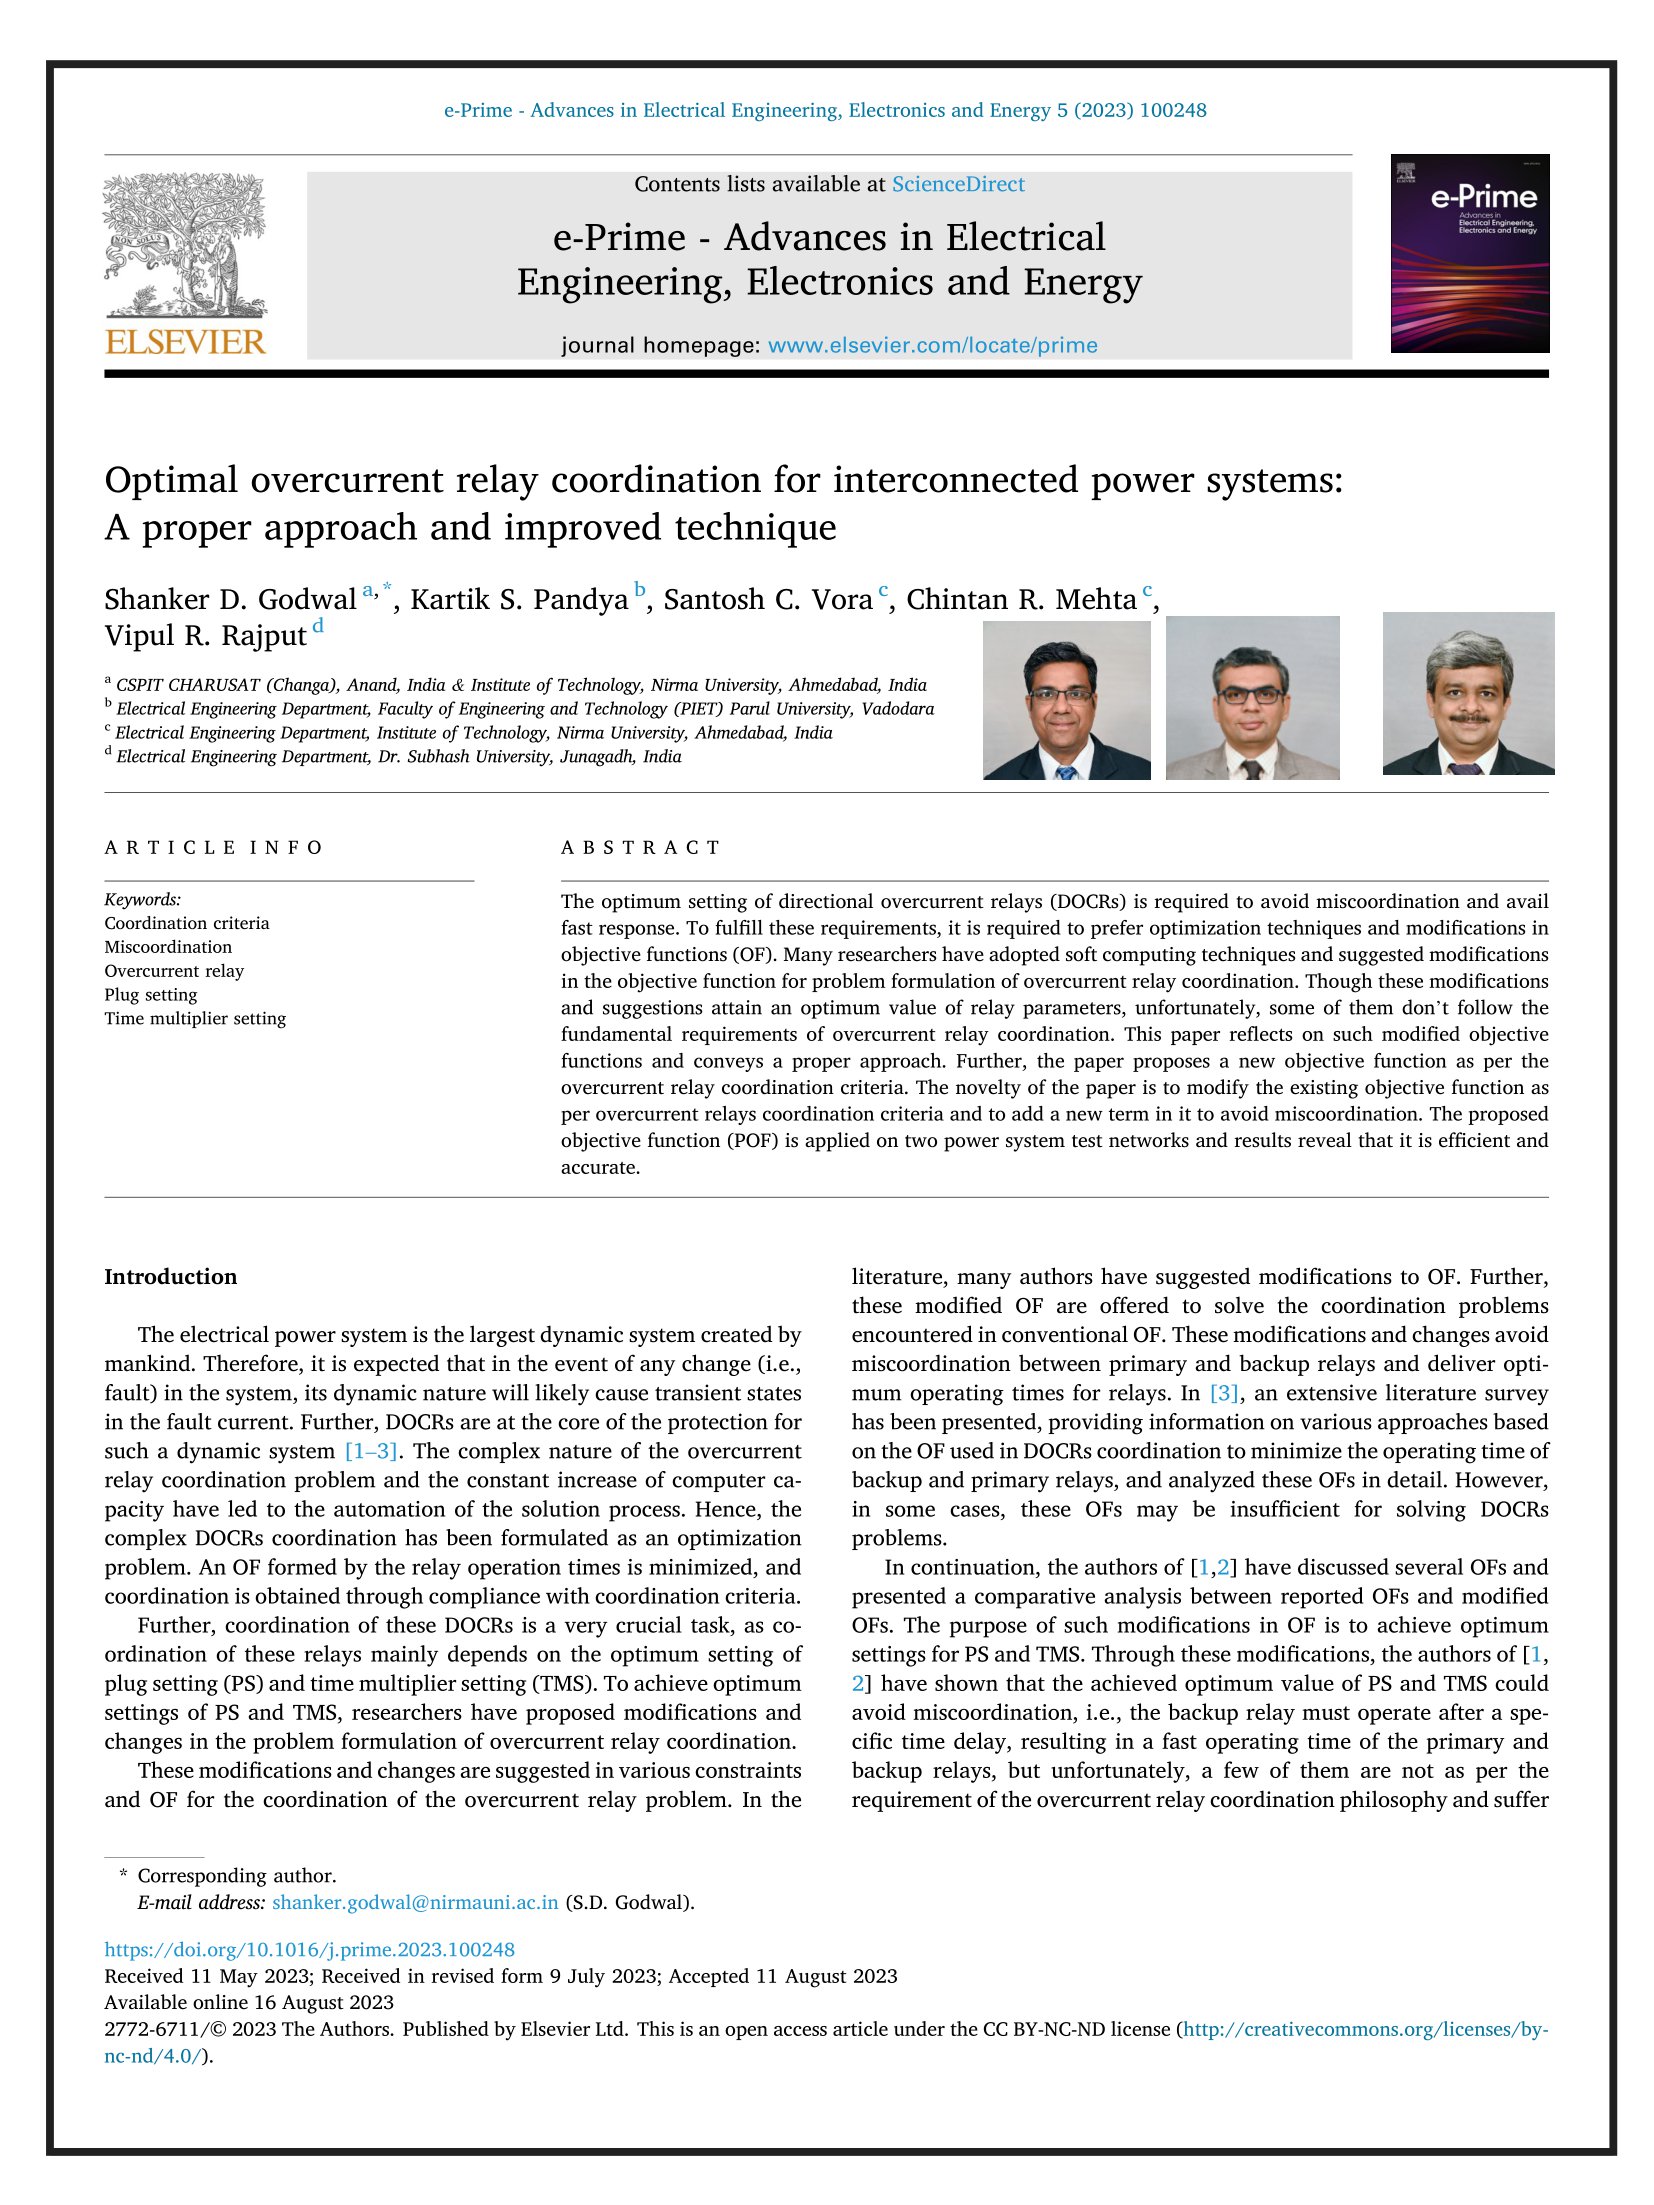 Optimal overcurrent relay coordination for interconnected power systems: A proper approach and improved technique